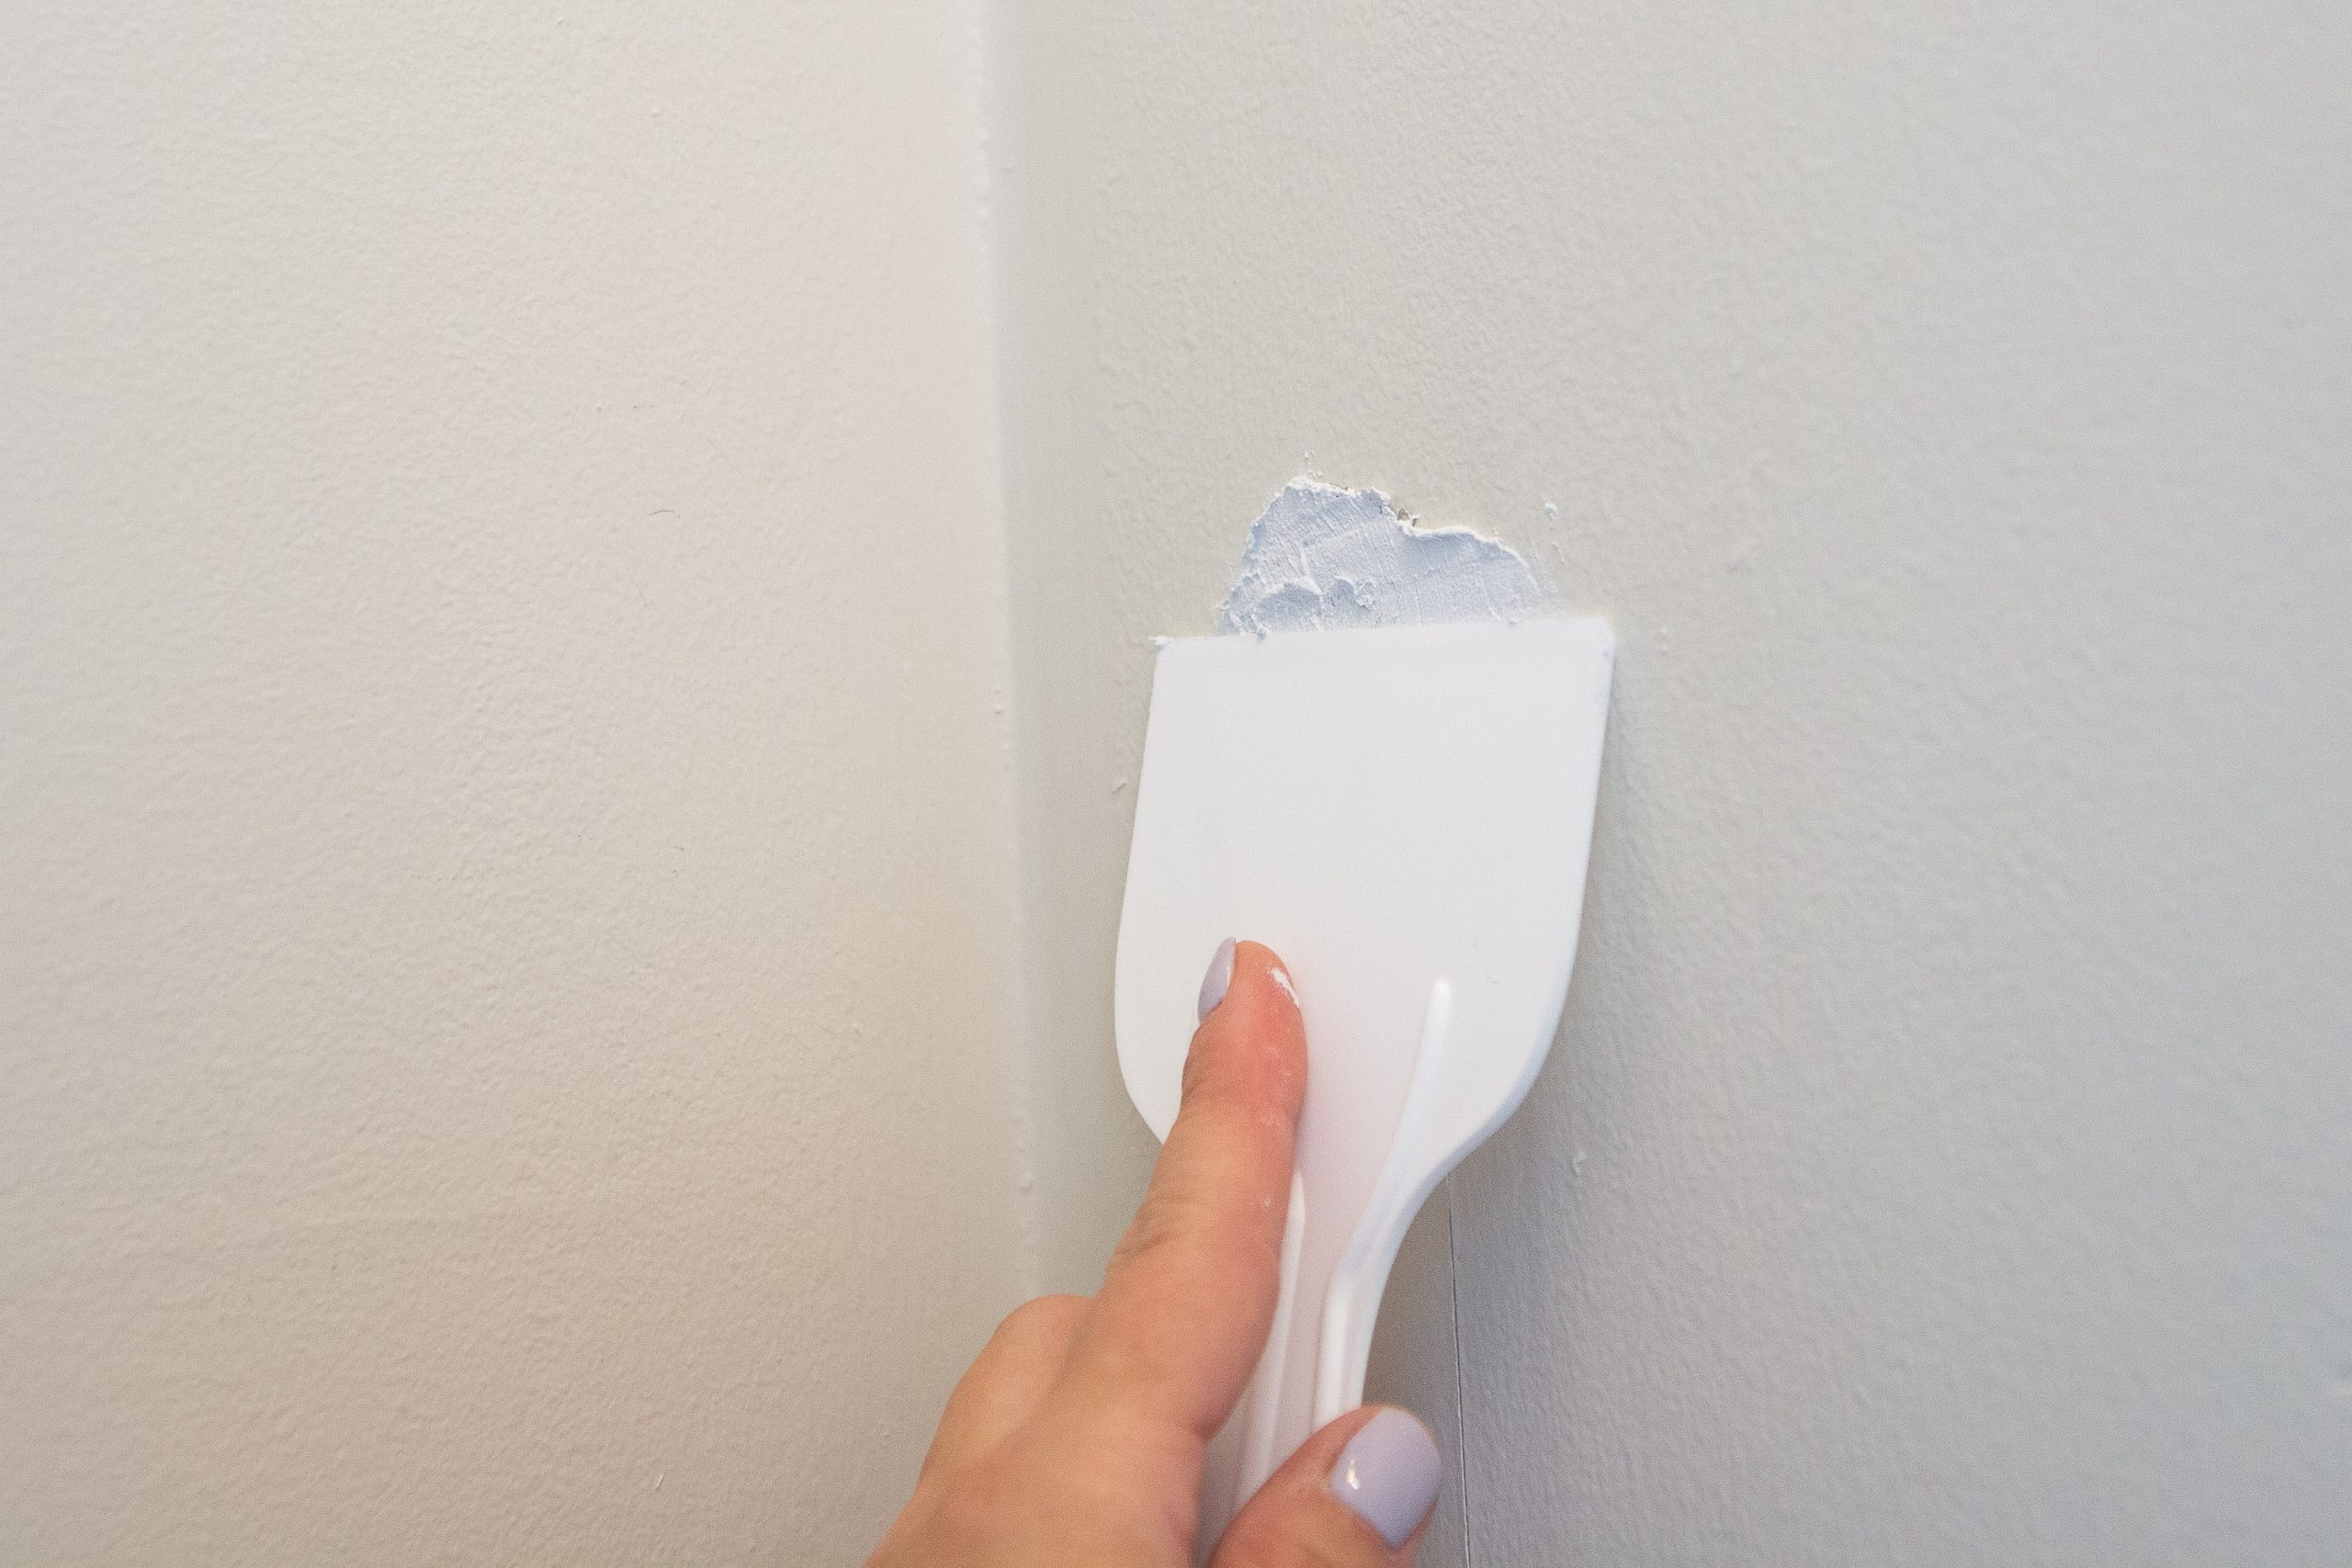 Add spackle to the wall